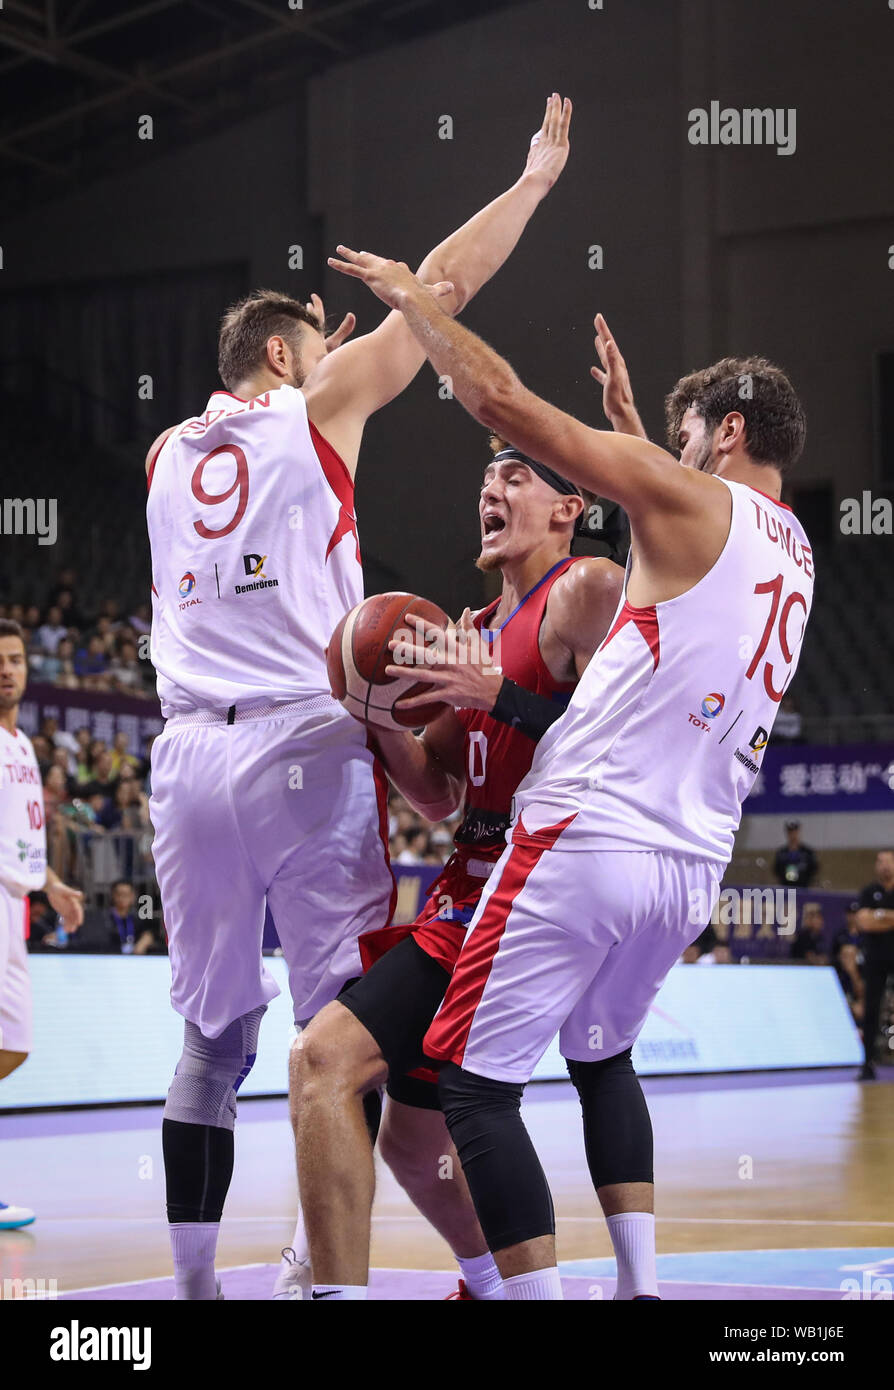 Suzhou, China's Jiangsu Province. 23rd Aug, 2019. Puerto Rico's Isaiah Pineiro (C) drives the ball during a match against Turkey at the 2019 Suzhou International Basketball Challenge and Culture Week in Suzhou, east China's Jiangsu Province, Aug. 23, 2019. Credit: Yang Lei/Xinhua/Alamy Live News Stock Photo